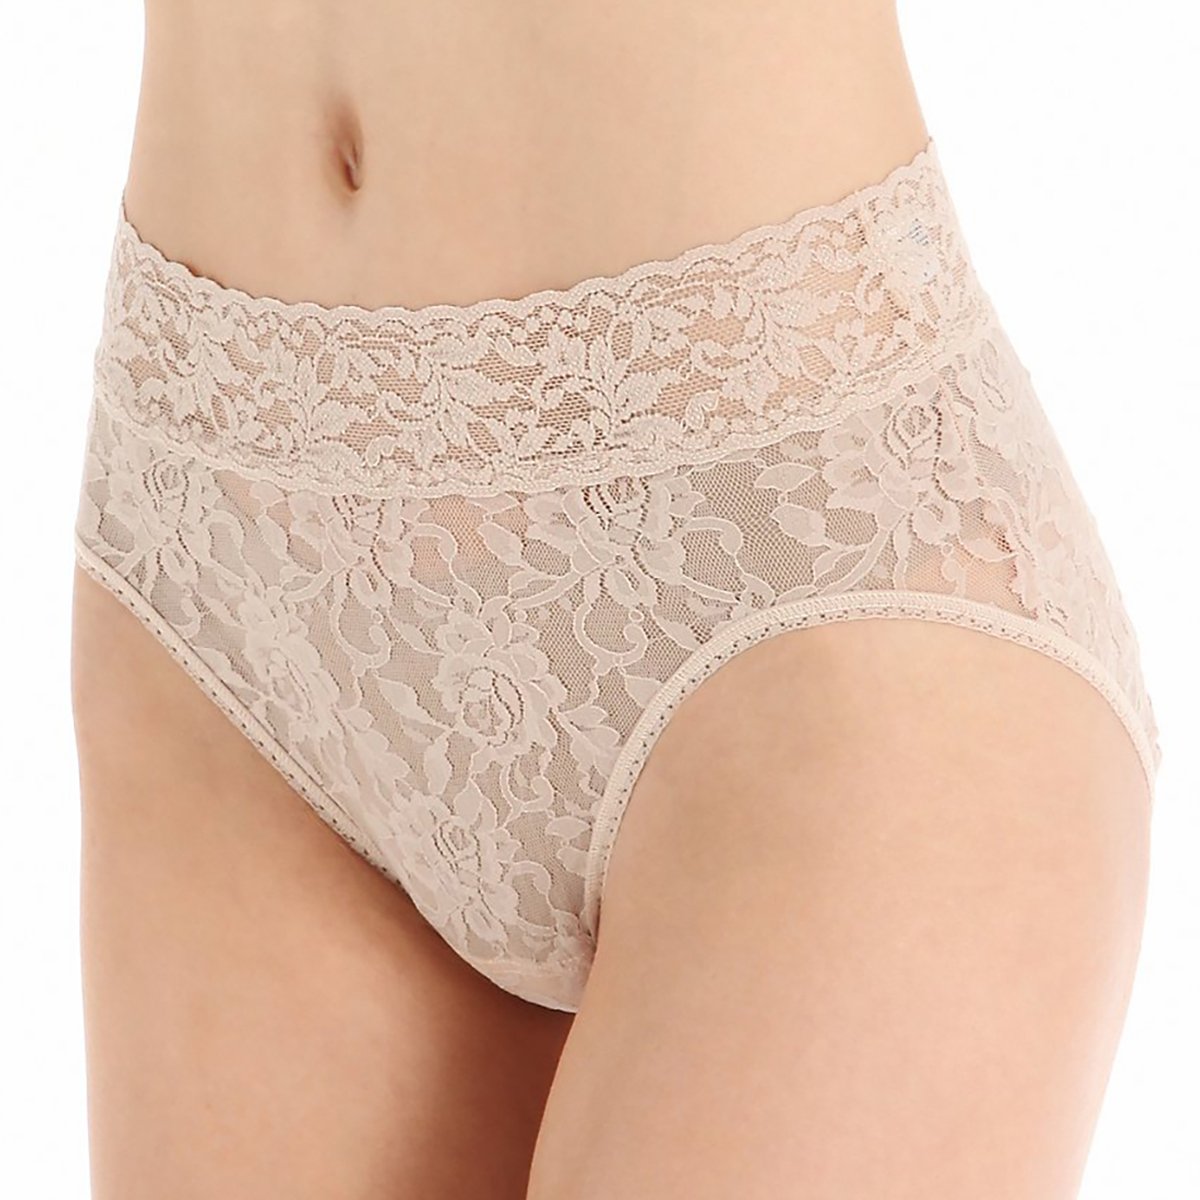 Hanky Panky 461 Signature Lace French Full Brief in Chai